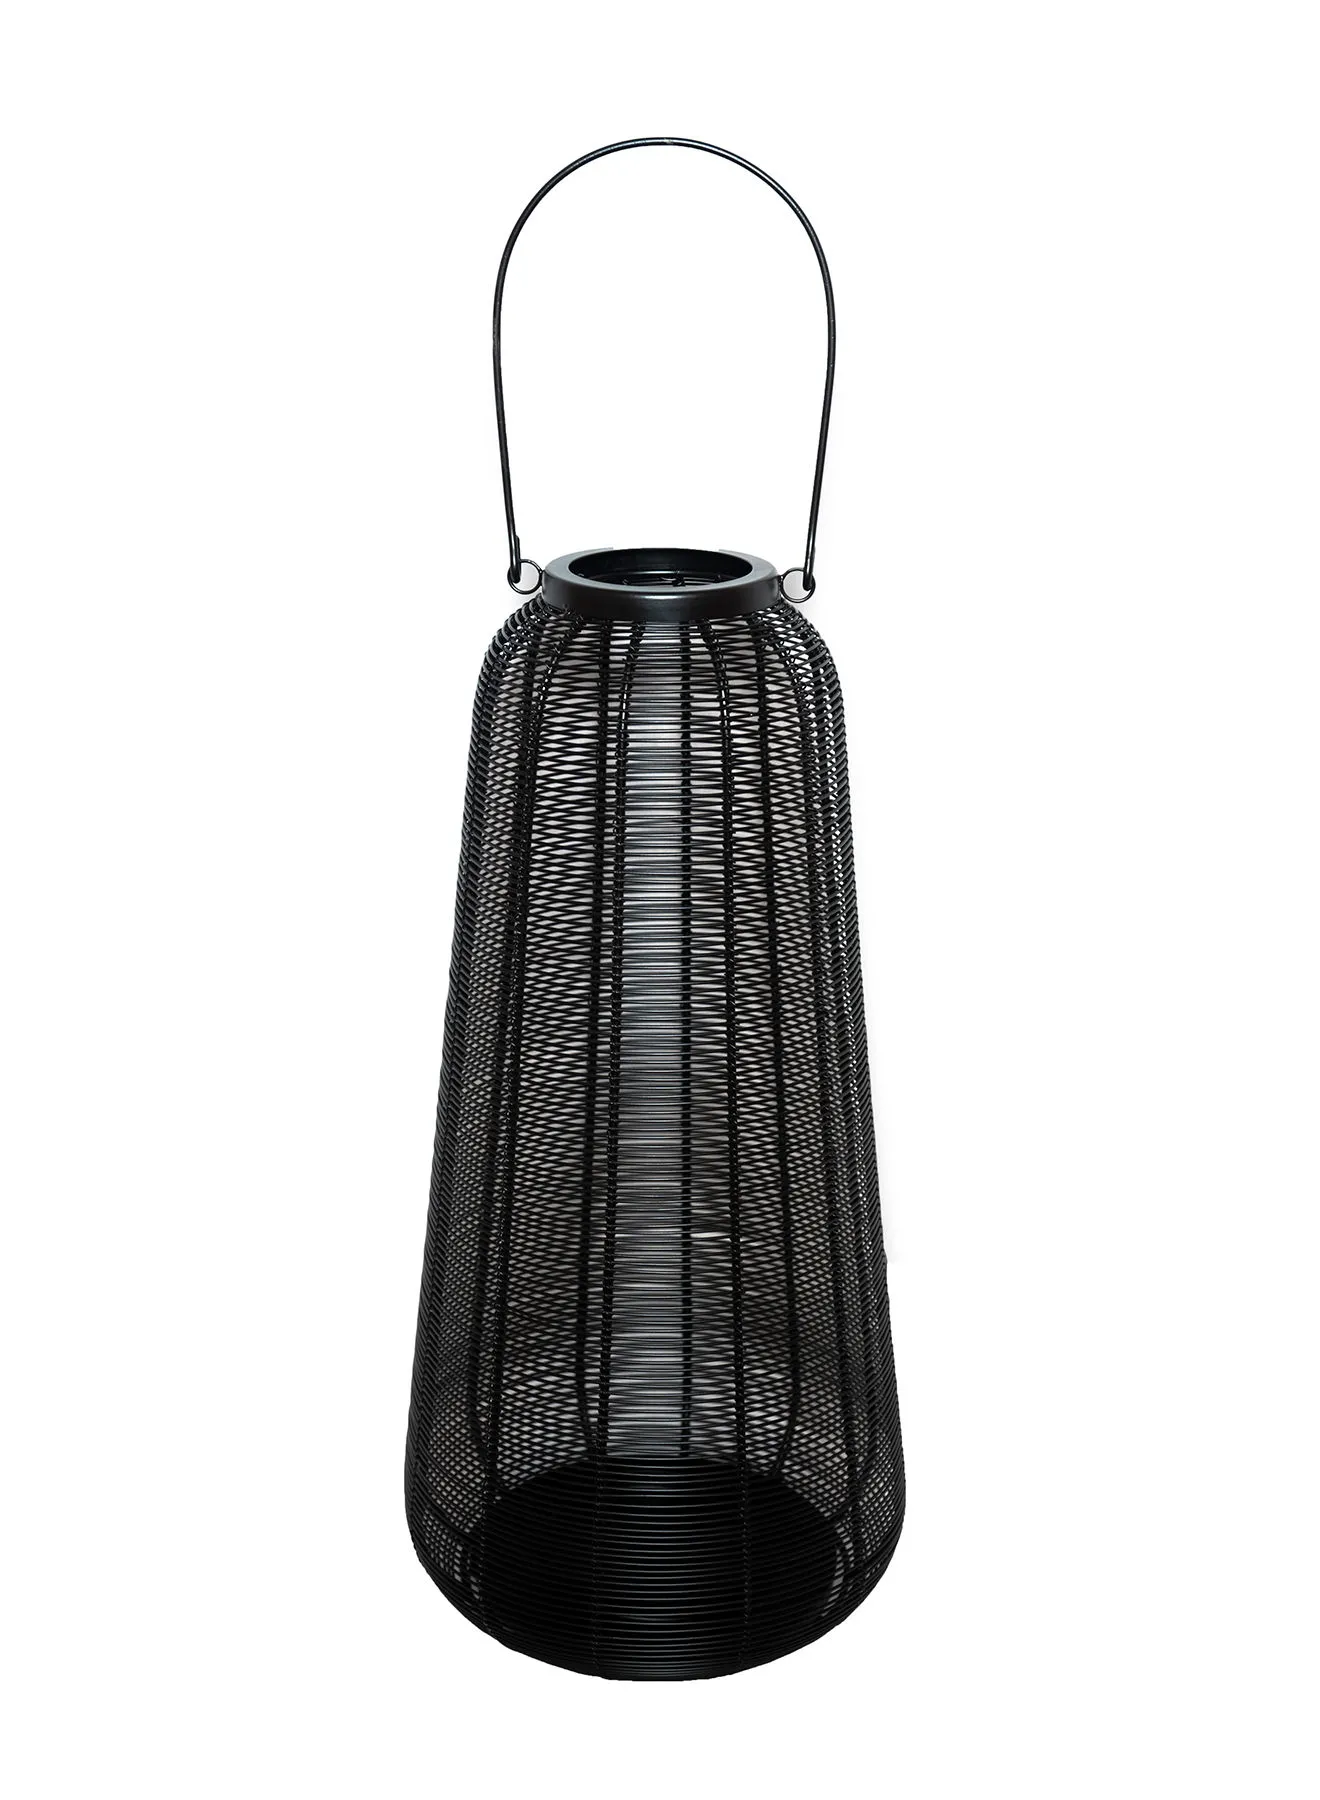 ebb & flow Trendy Handmade Candle Iron Holder Lantern Unique Luxury Quality Scents For The Perfect Stylish Home Black 25.4 x 25.4 x 54centimeter